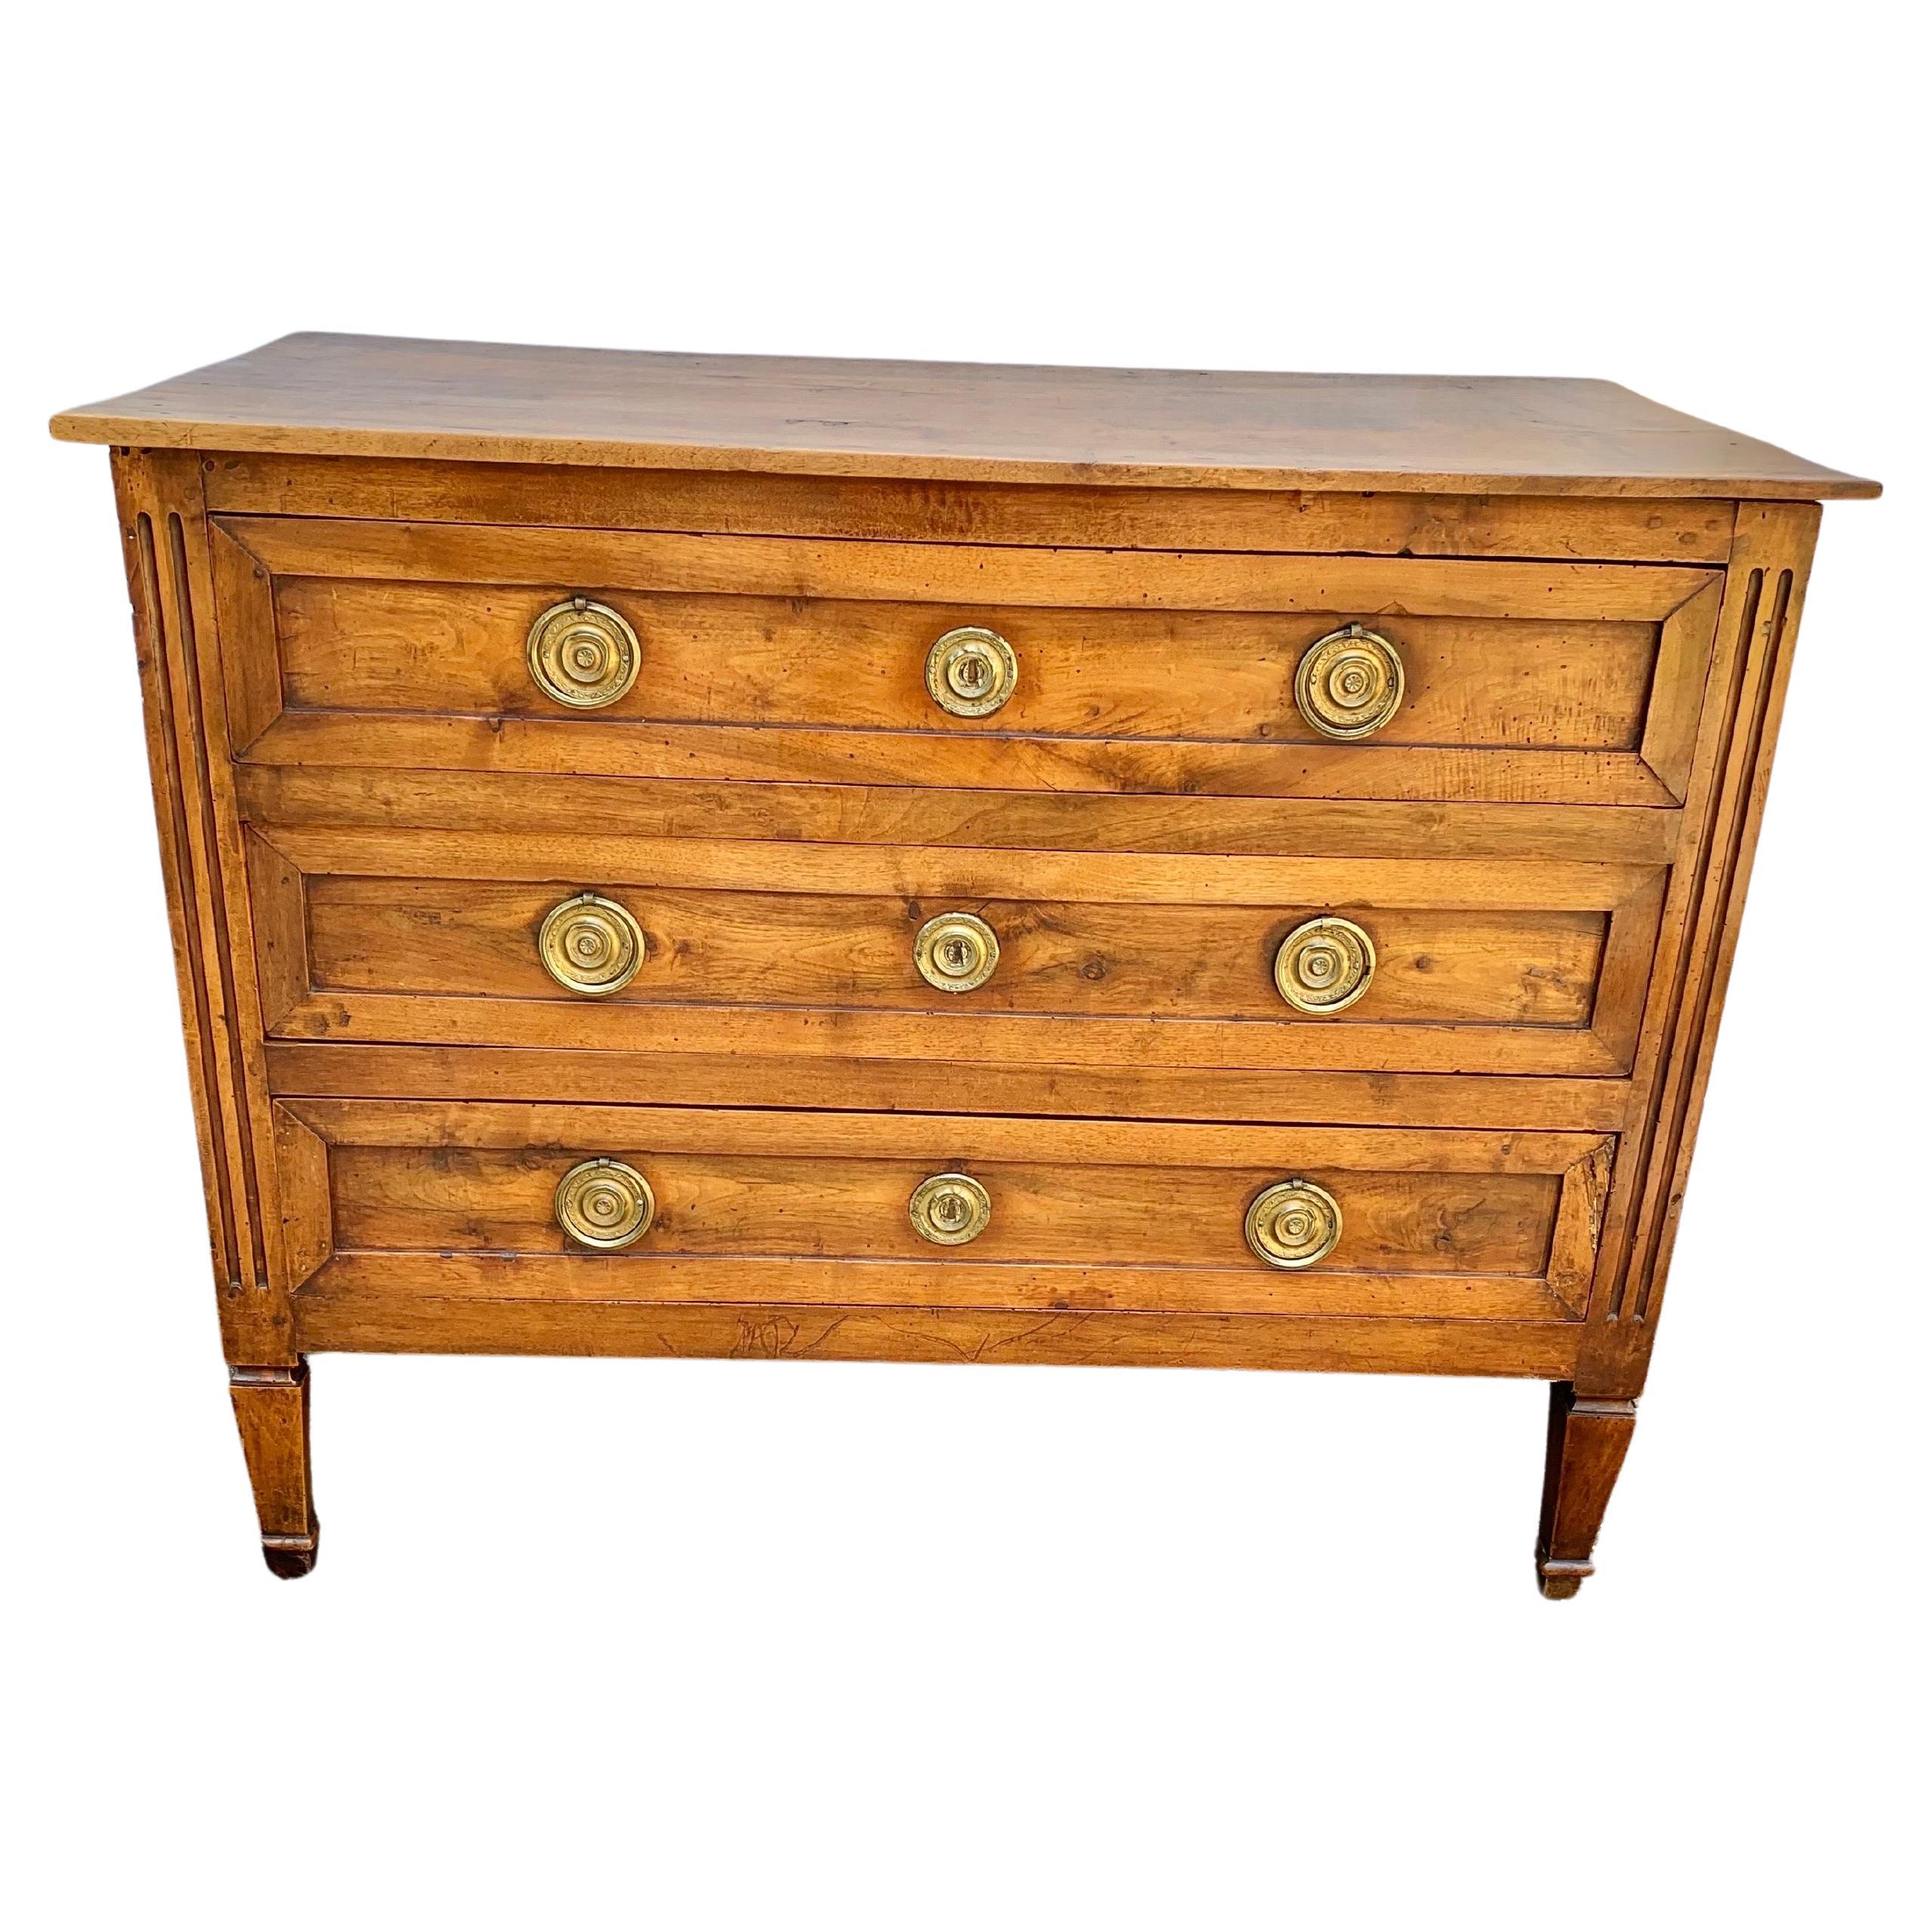 Found in the South of France, this 19th Century French Louis XVI Style Commode or Chest of Drawers was crafted from old growth Walnut by furniture artisans in the late 1800's. The piece features a rectangular planked top sitting above three drawers